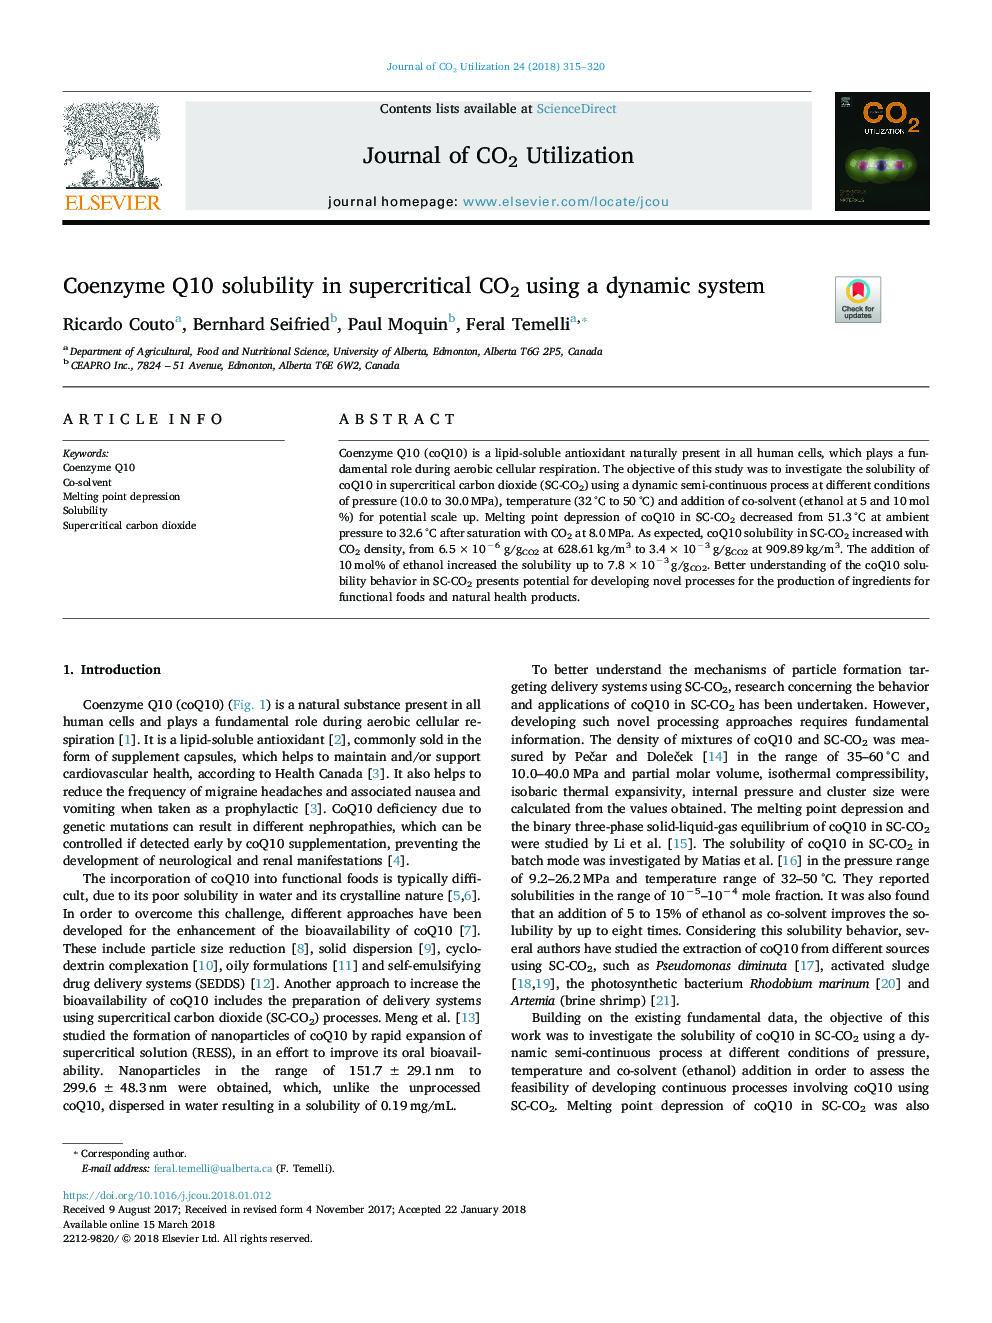 Coenzyme Q10 solubility in supercritical CO2 using a dynamic system